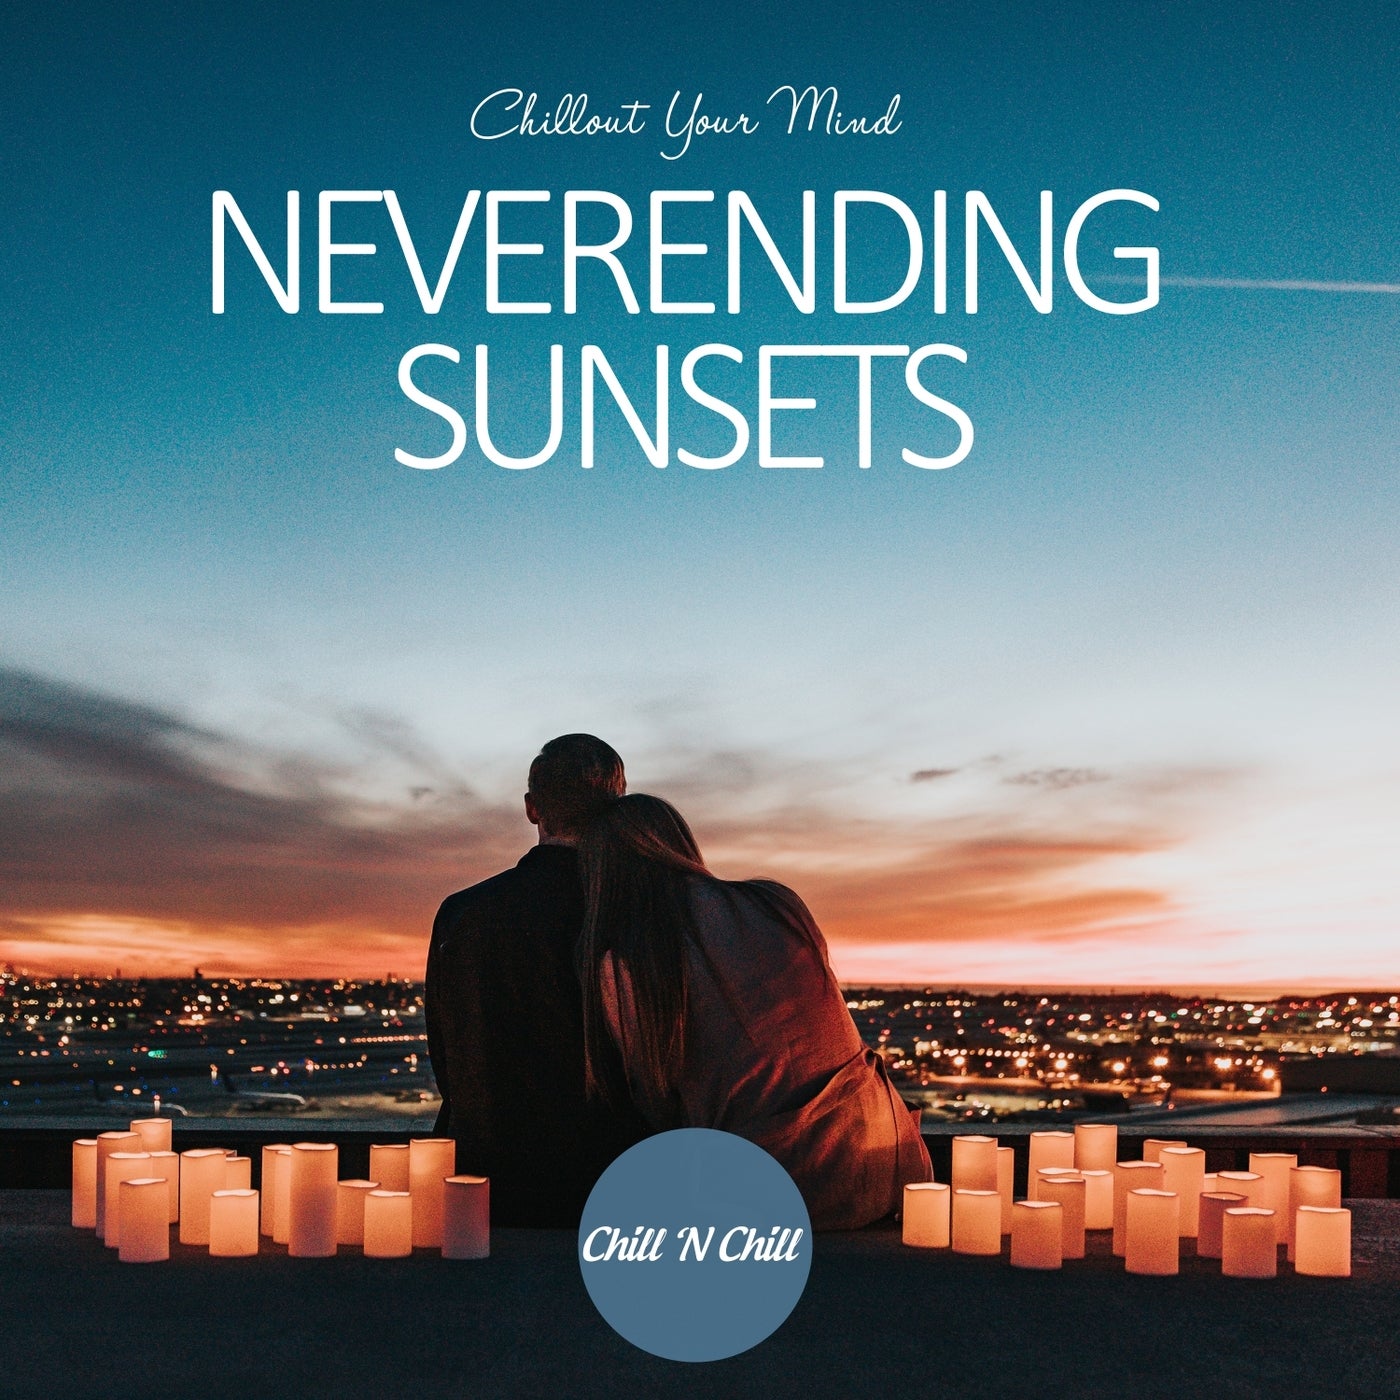 Neverending Sunsets: Chillout Your Mind